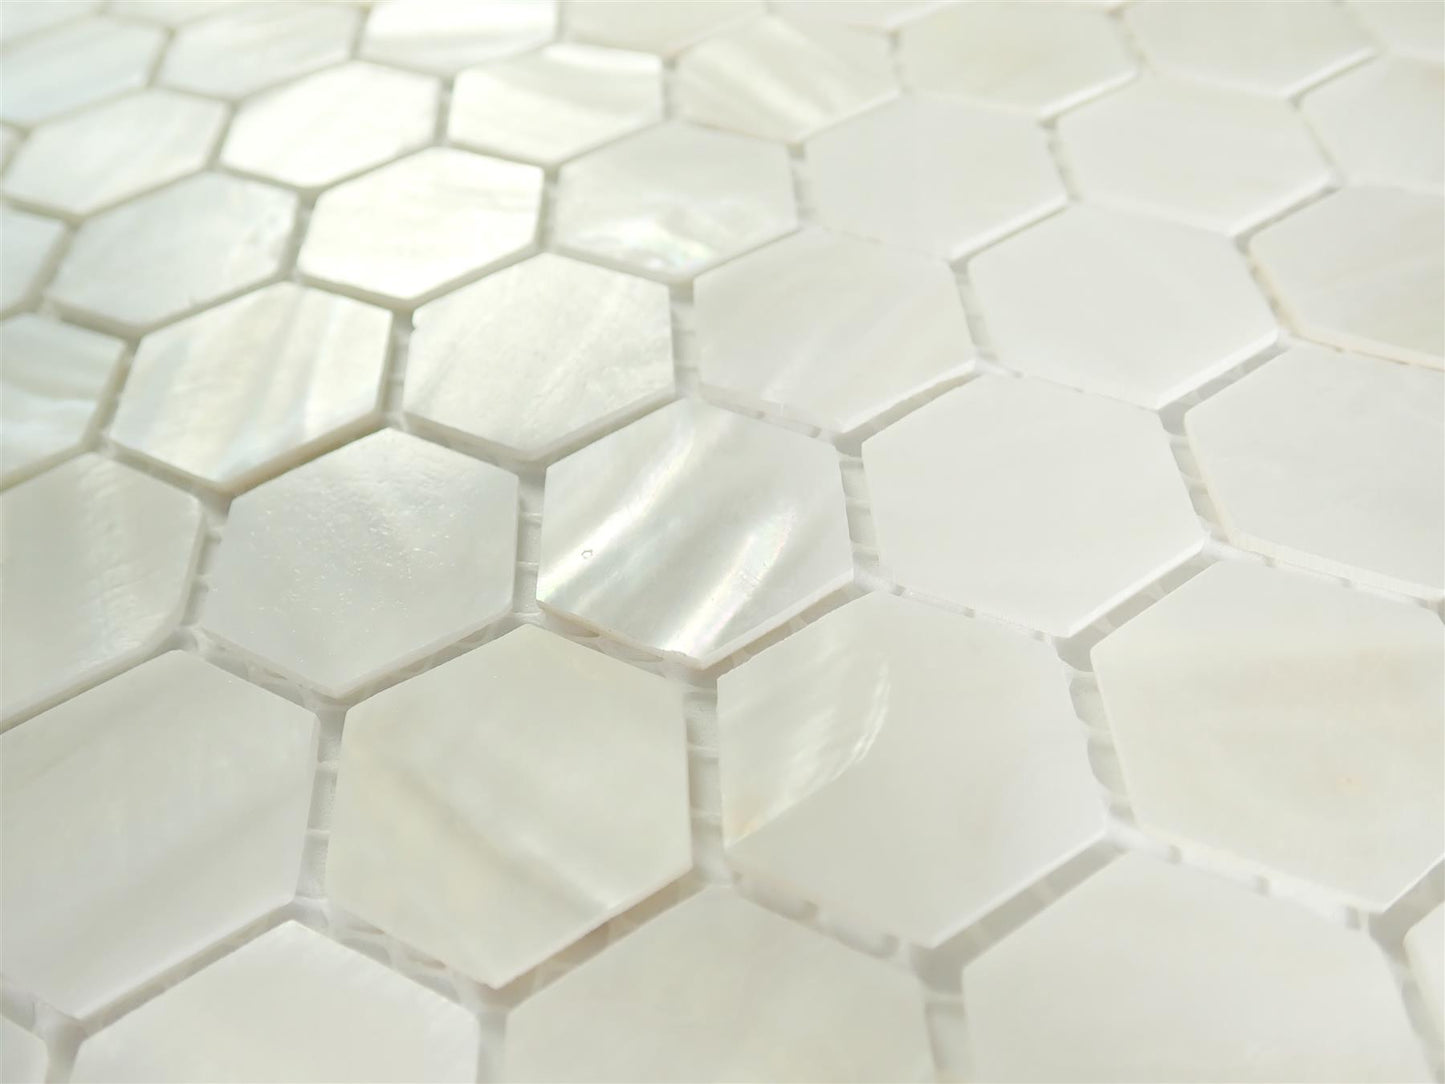 Incudo White Hexagon Mosaic Mother of Pearl Tile - 295x285x2mm (11.6x11.22x0.08")